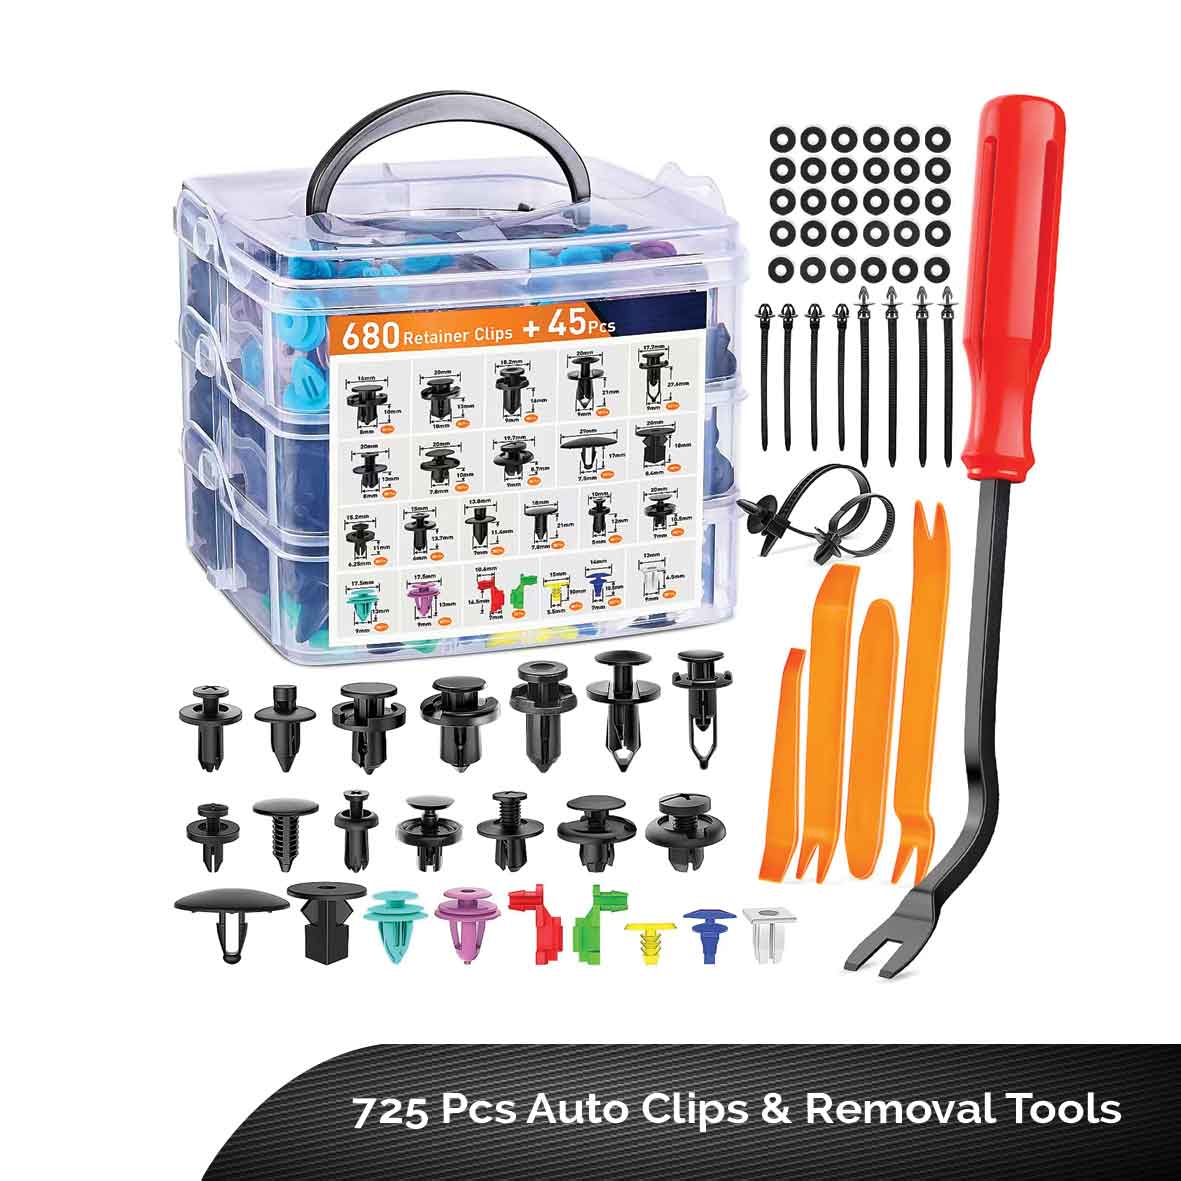 725 Pcs Auto Clips & Removal Tools - RT Media Solutions